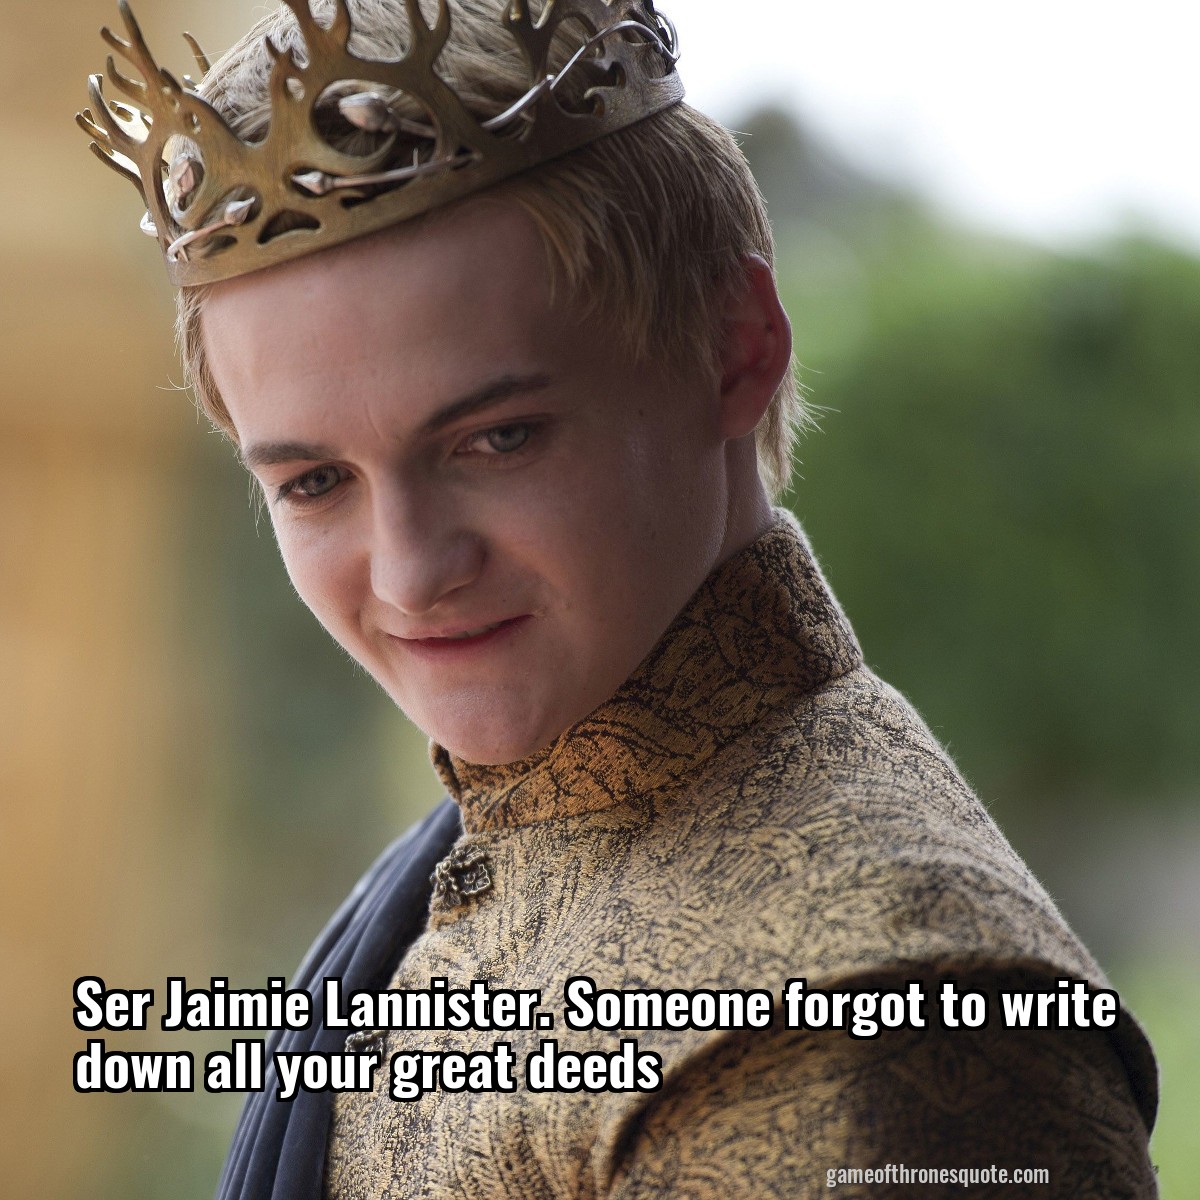 Ser Jaimie Lannister. Someone forgot to write down all your great deeds